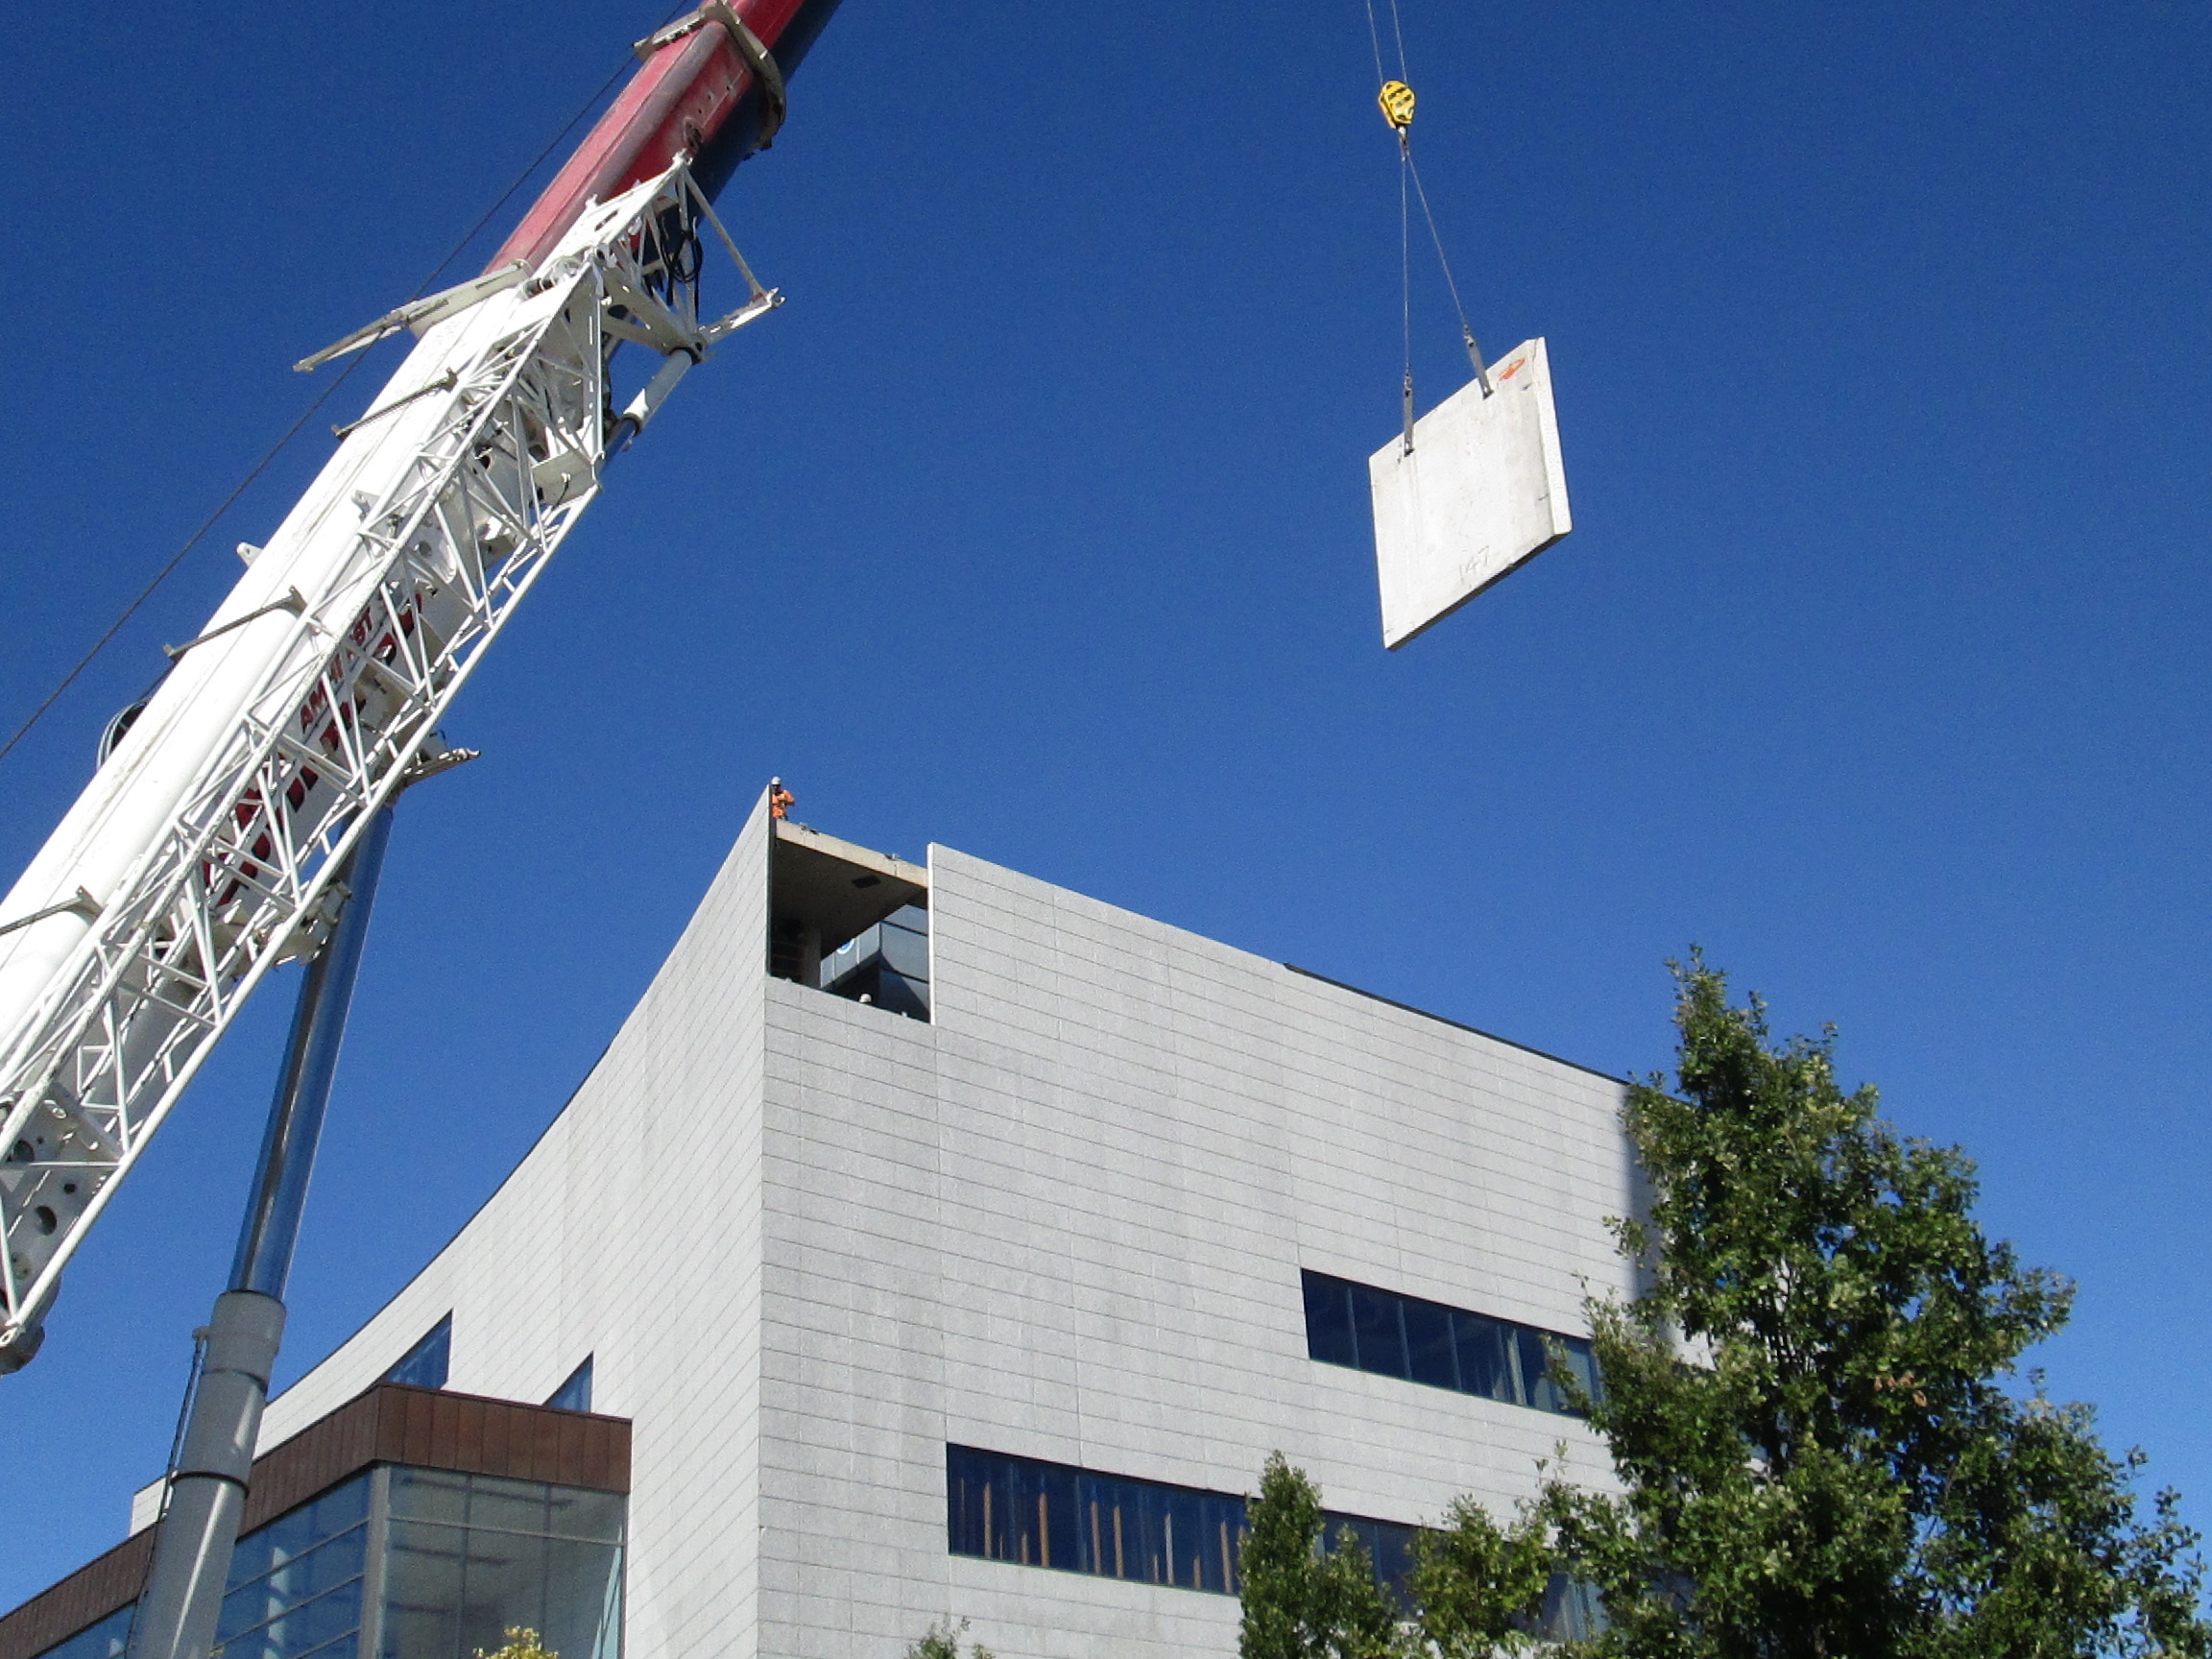 Image of a precast panel being installed